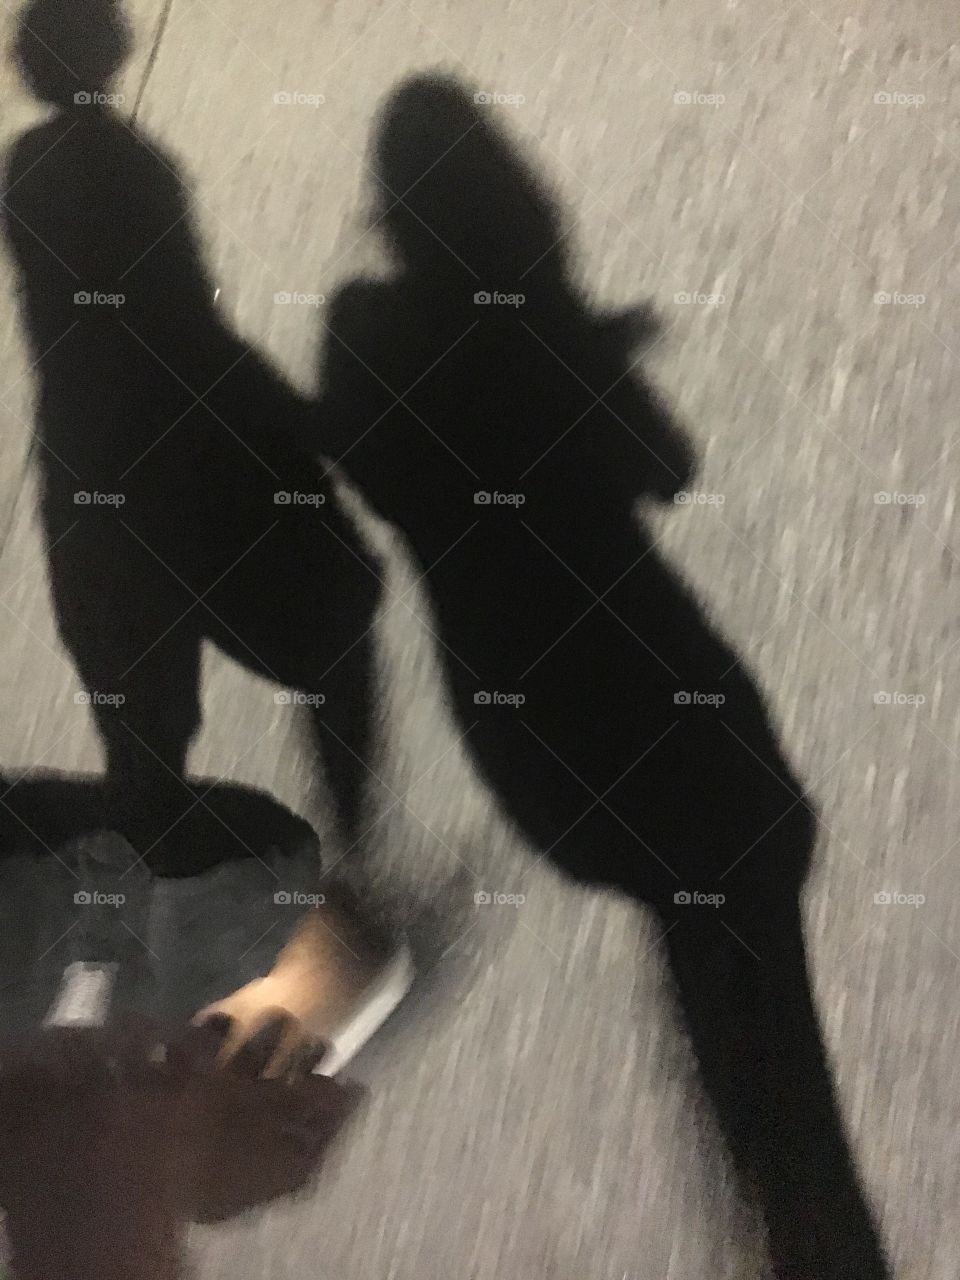 Shadows and Holding Hands 